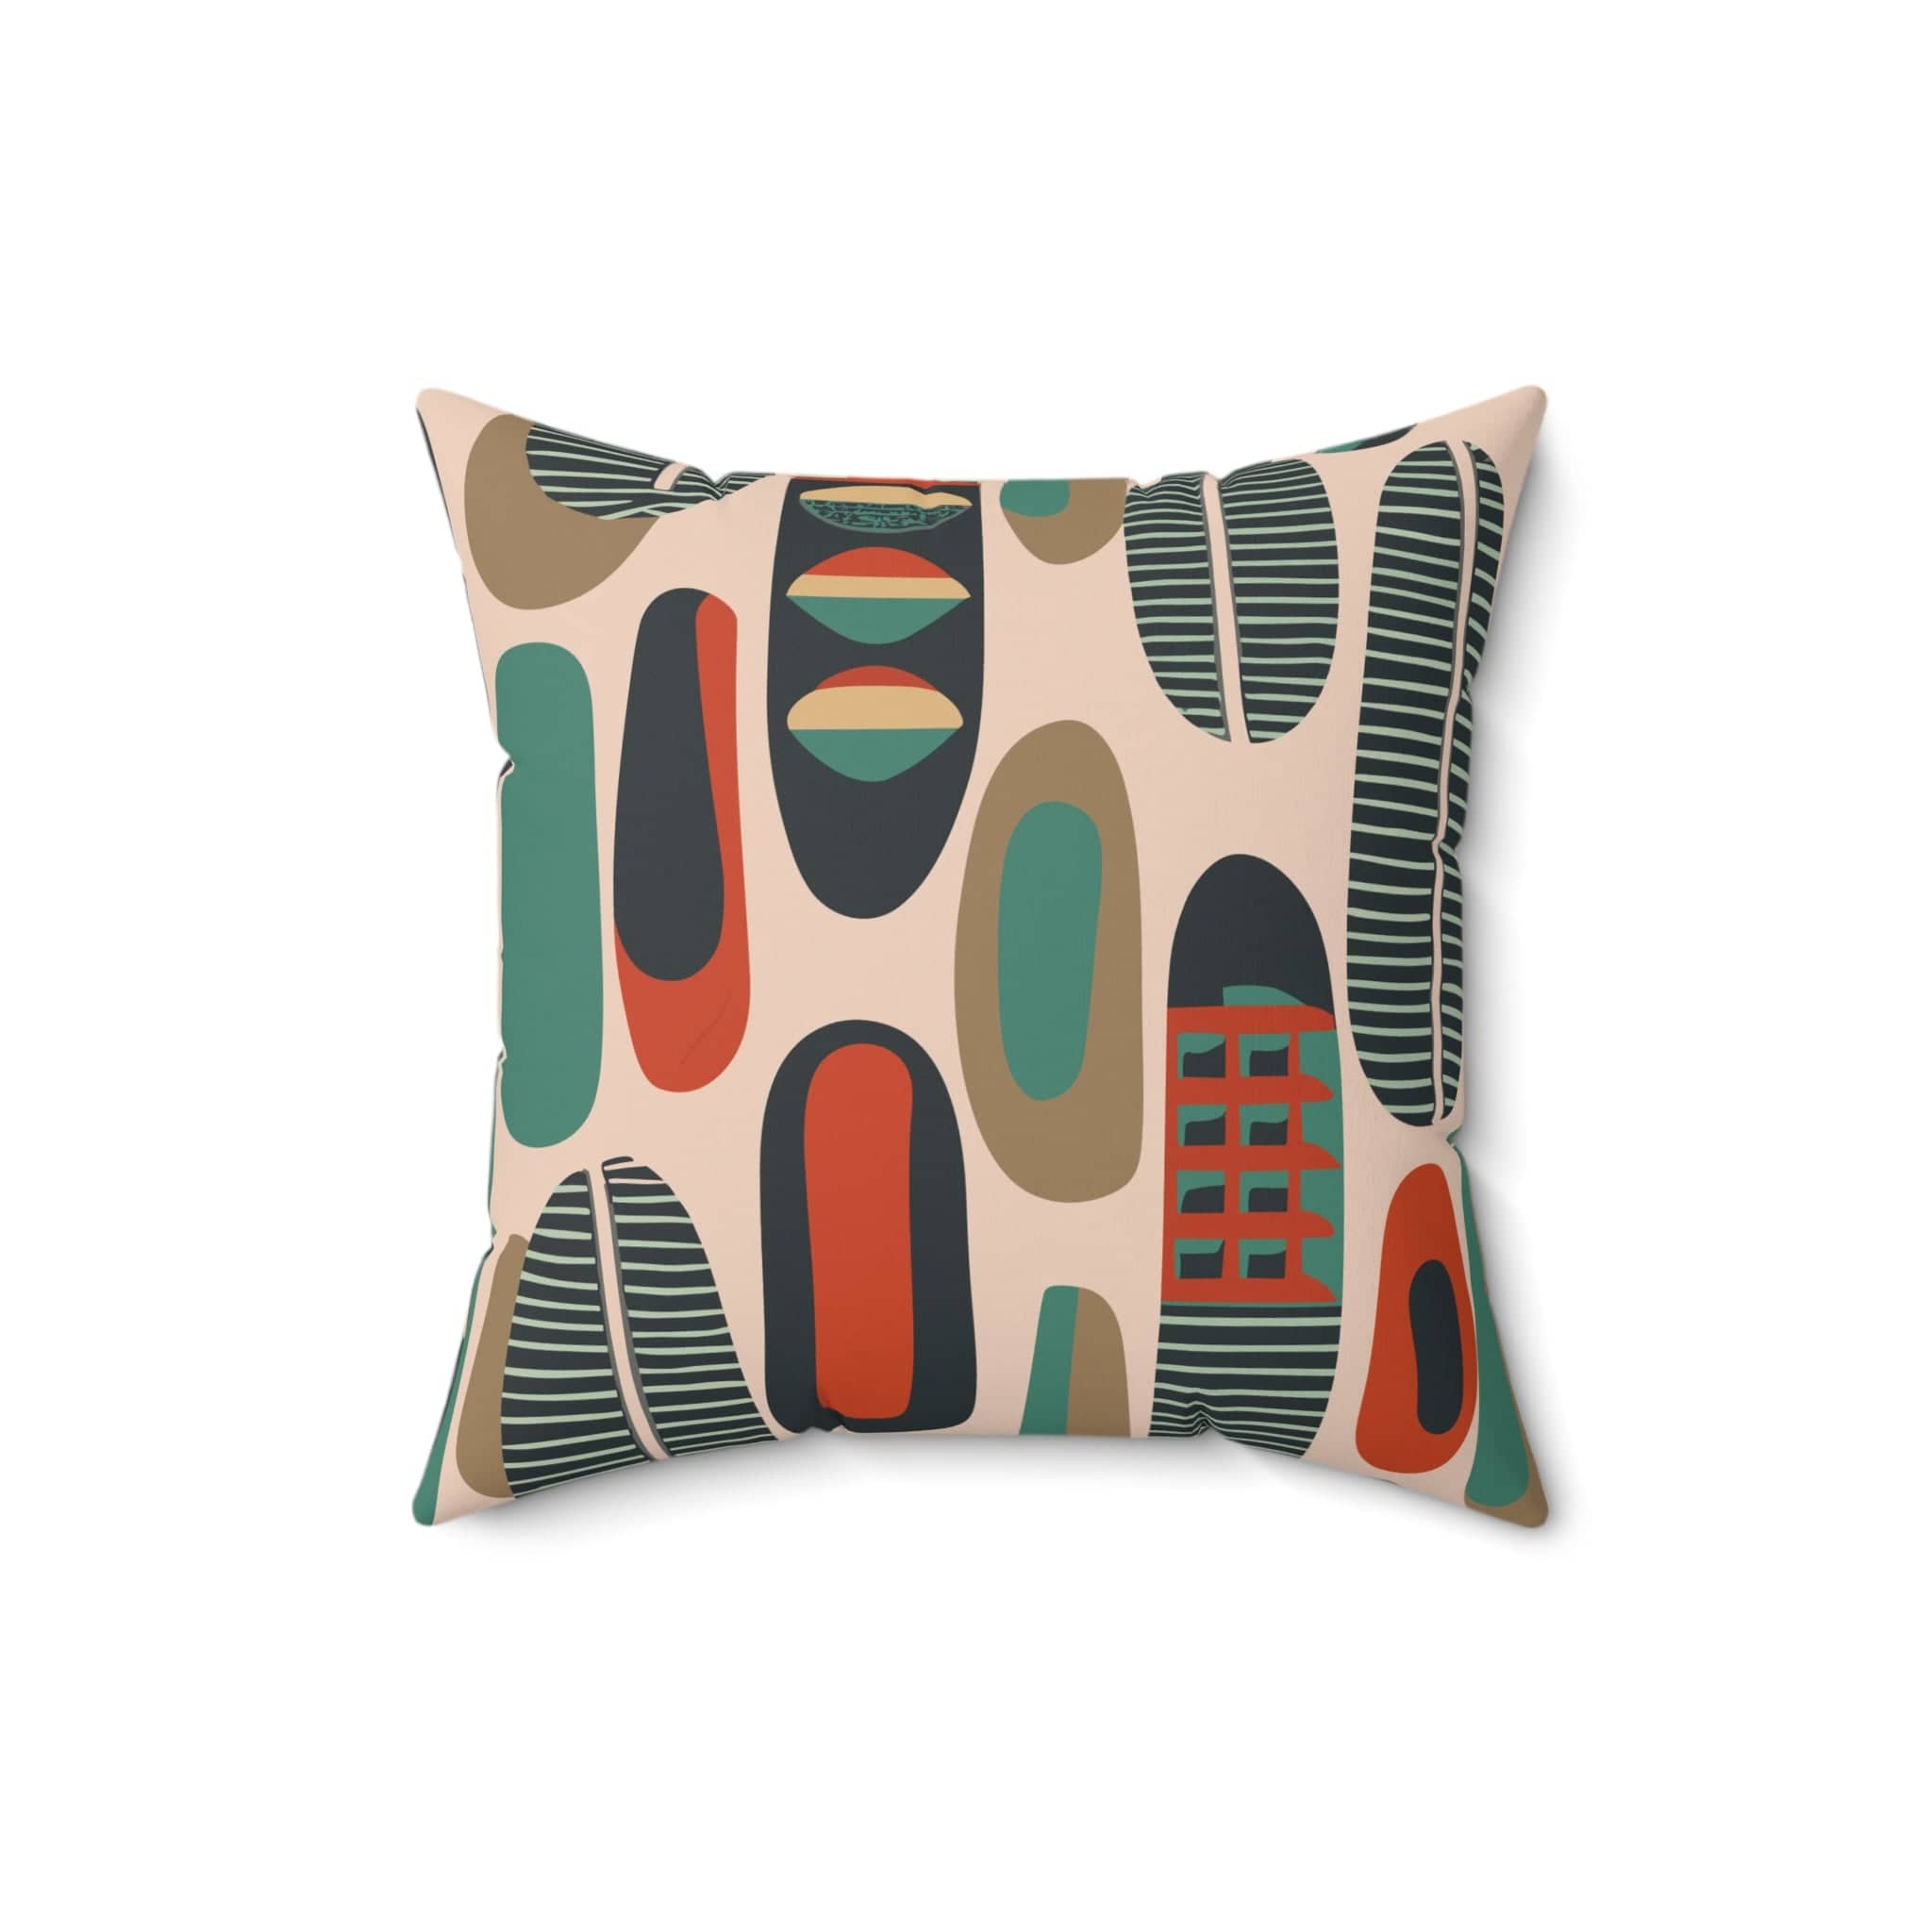 Kate McEnroe New York MCM Abstract Throw Pillow, Retro Chic Cushion Cover, Organic Shapes Pillow Sham, Mid-Century Modernist Decor Throw Pillows 16&quot; × 16&quot; 56174234549854756774